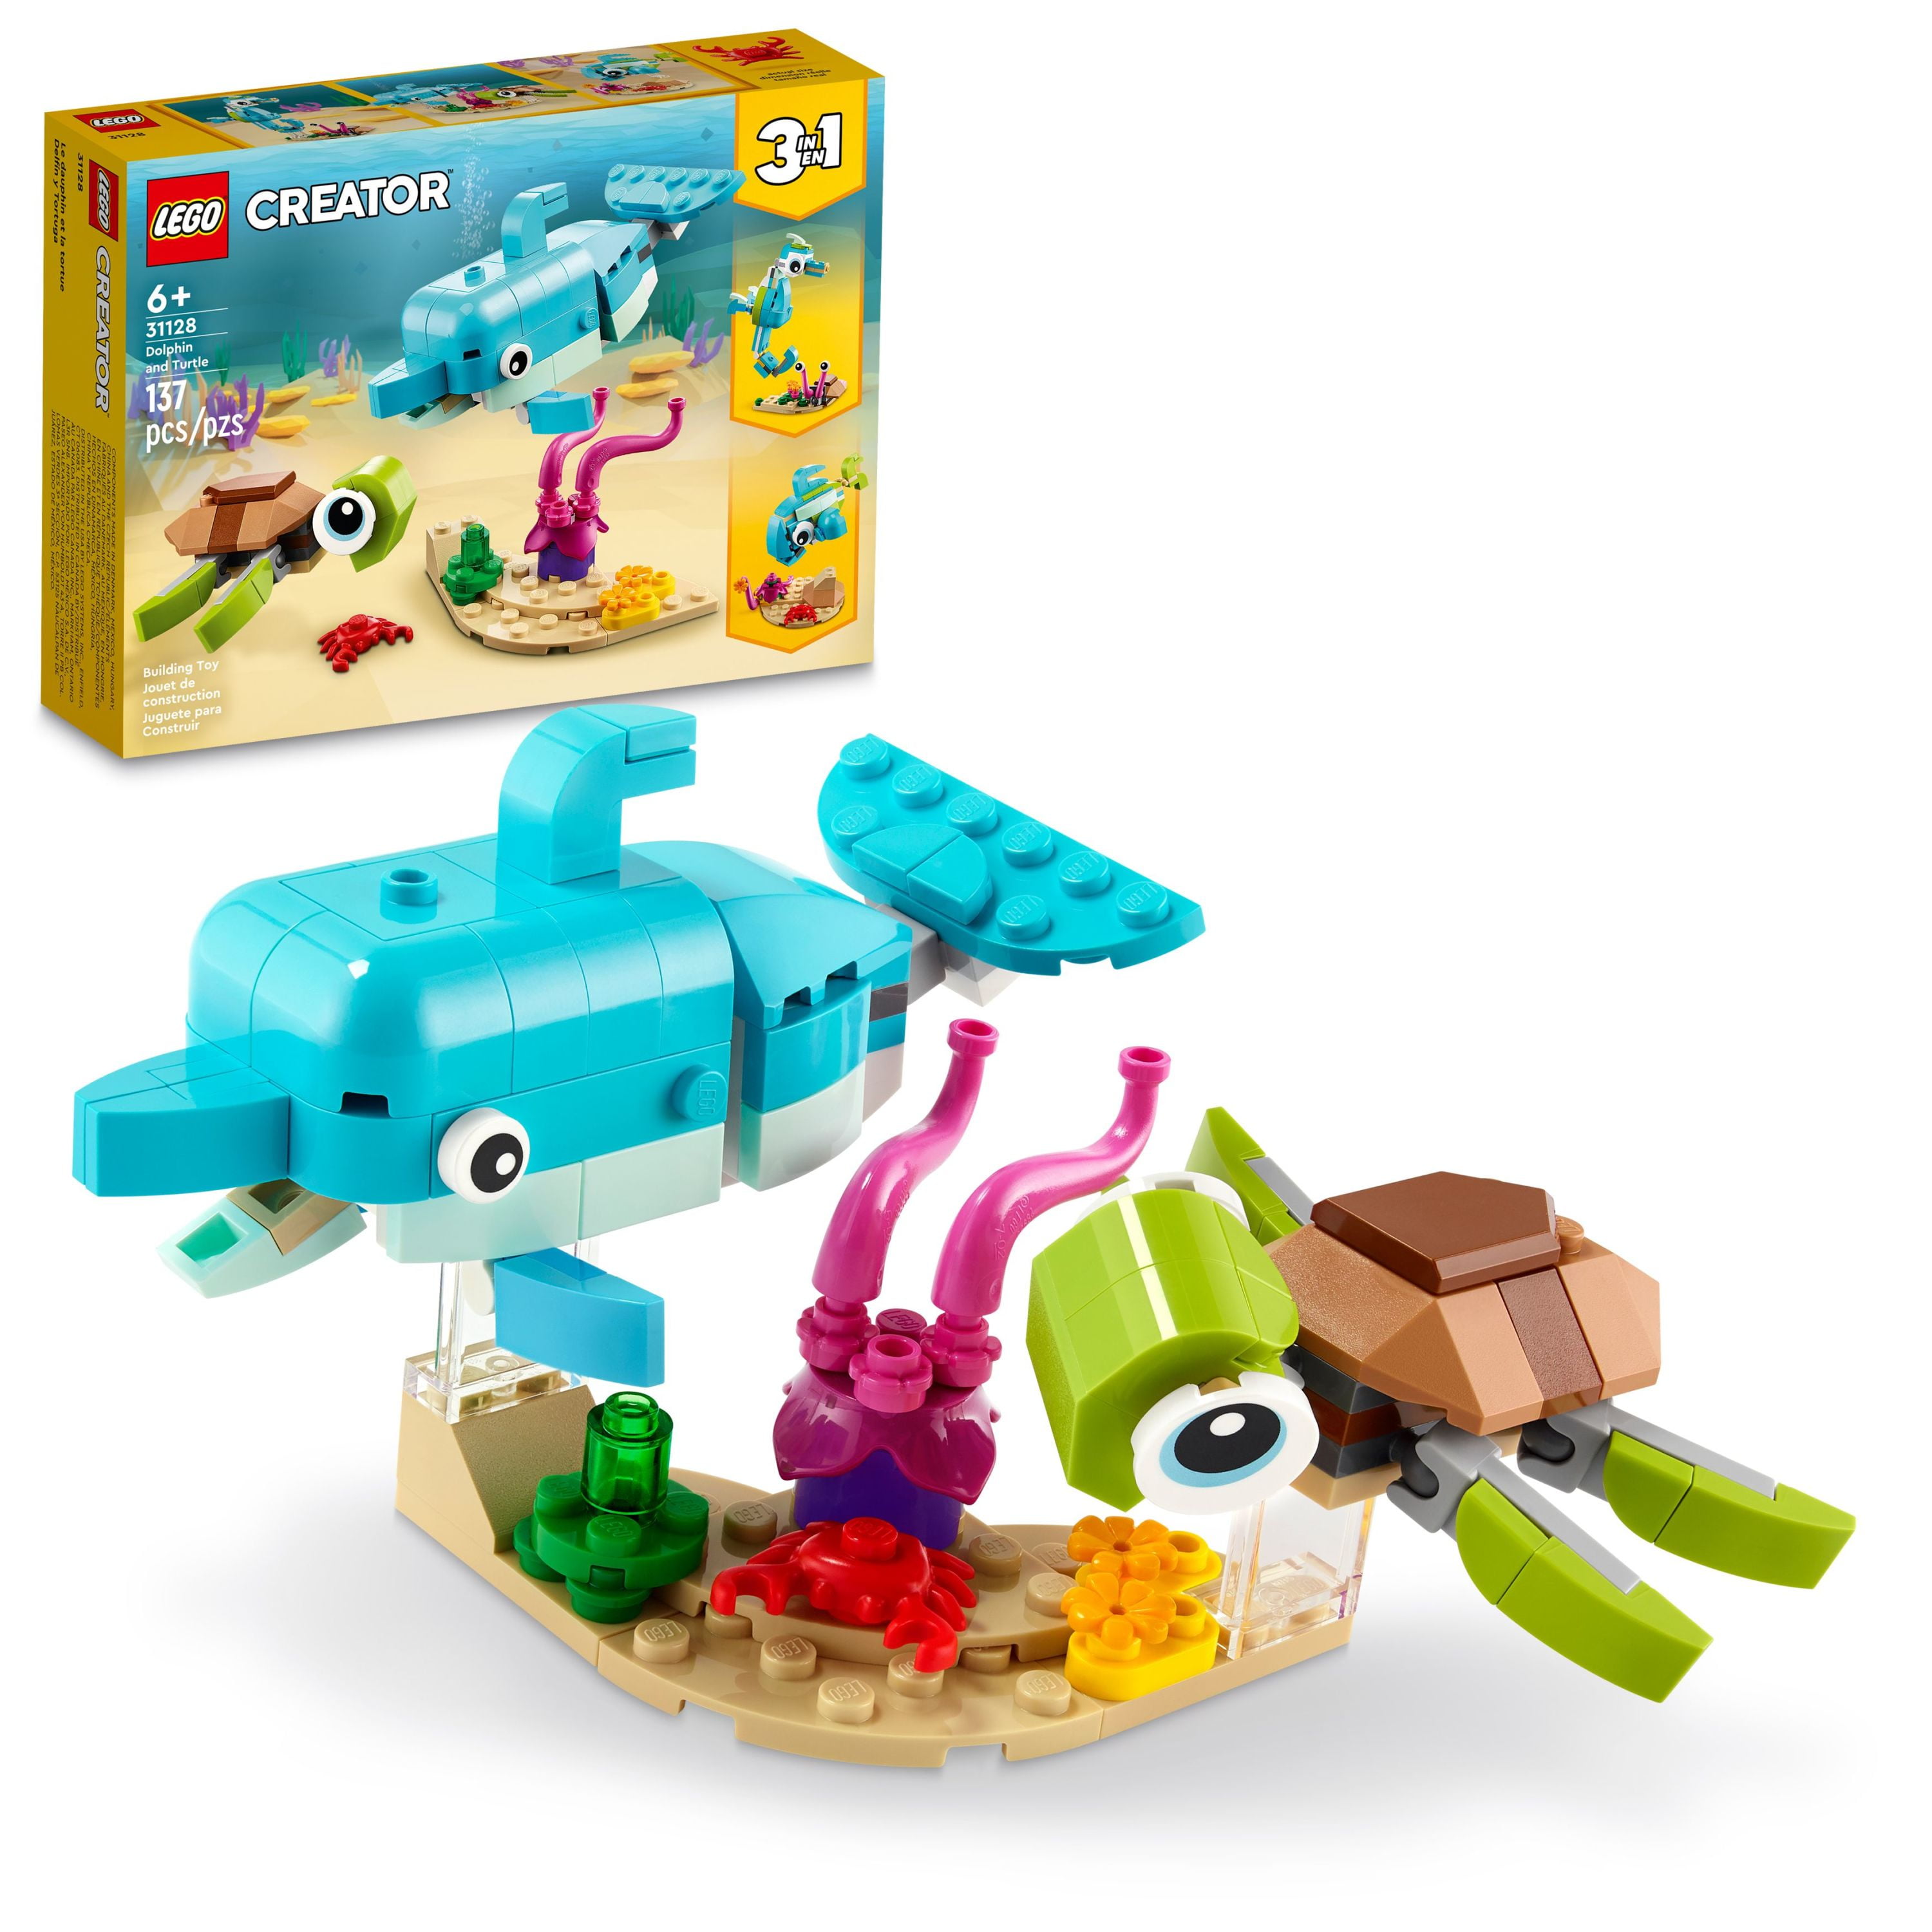 LEGO Creator 3in1 Dolphin and Turtle to Seahorse 31128 Toys for Kids 6 Plus Years Old, Toy Sea Animal Figures Building Set